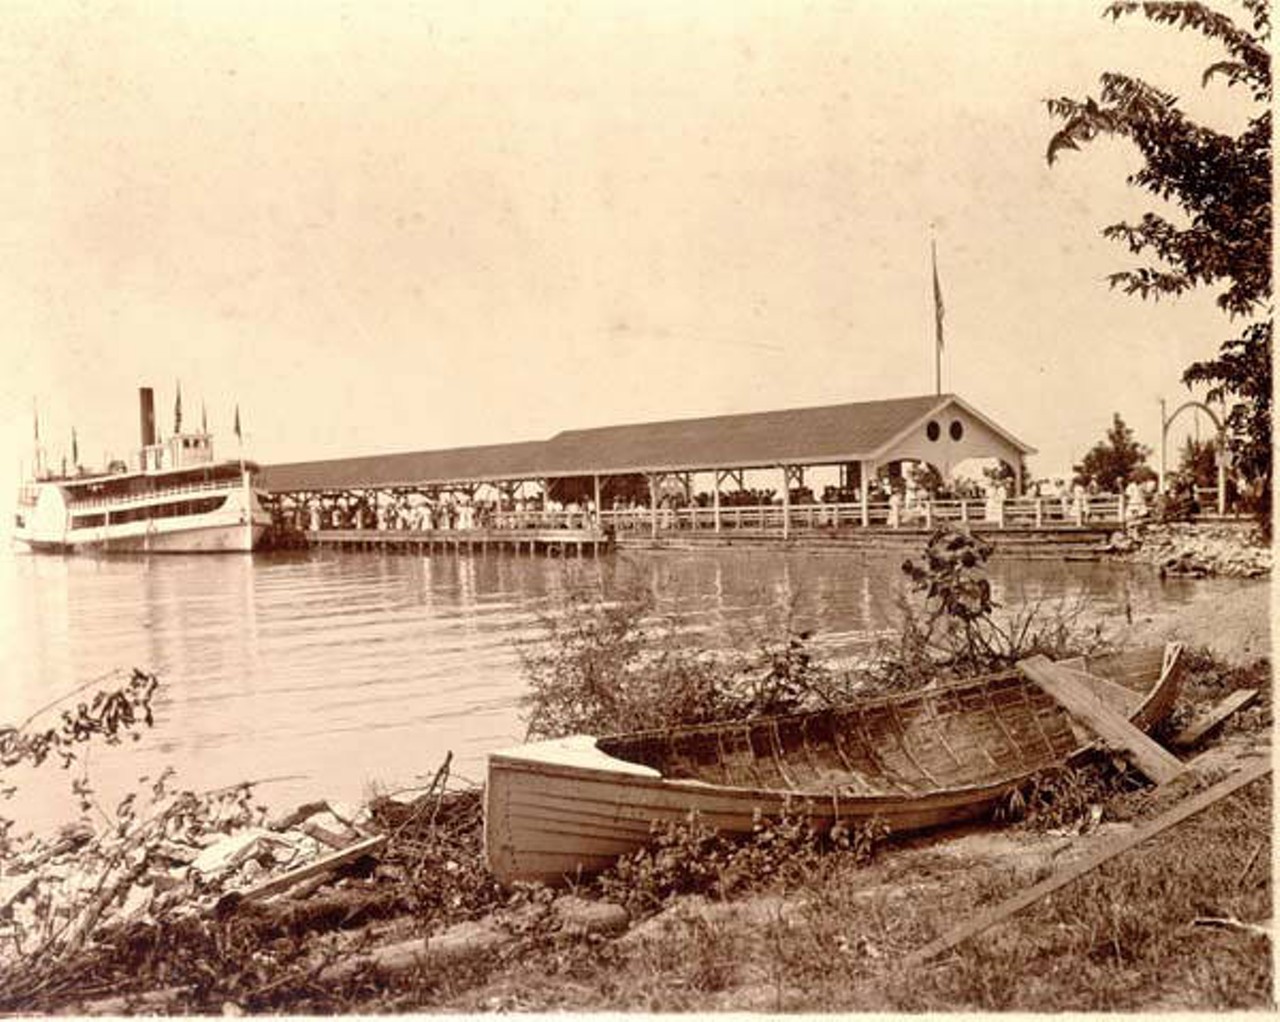  Ferry at Dock, 1900 